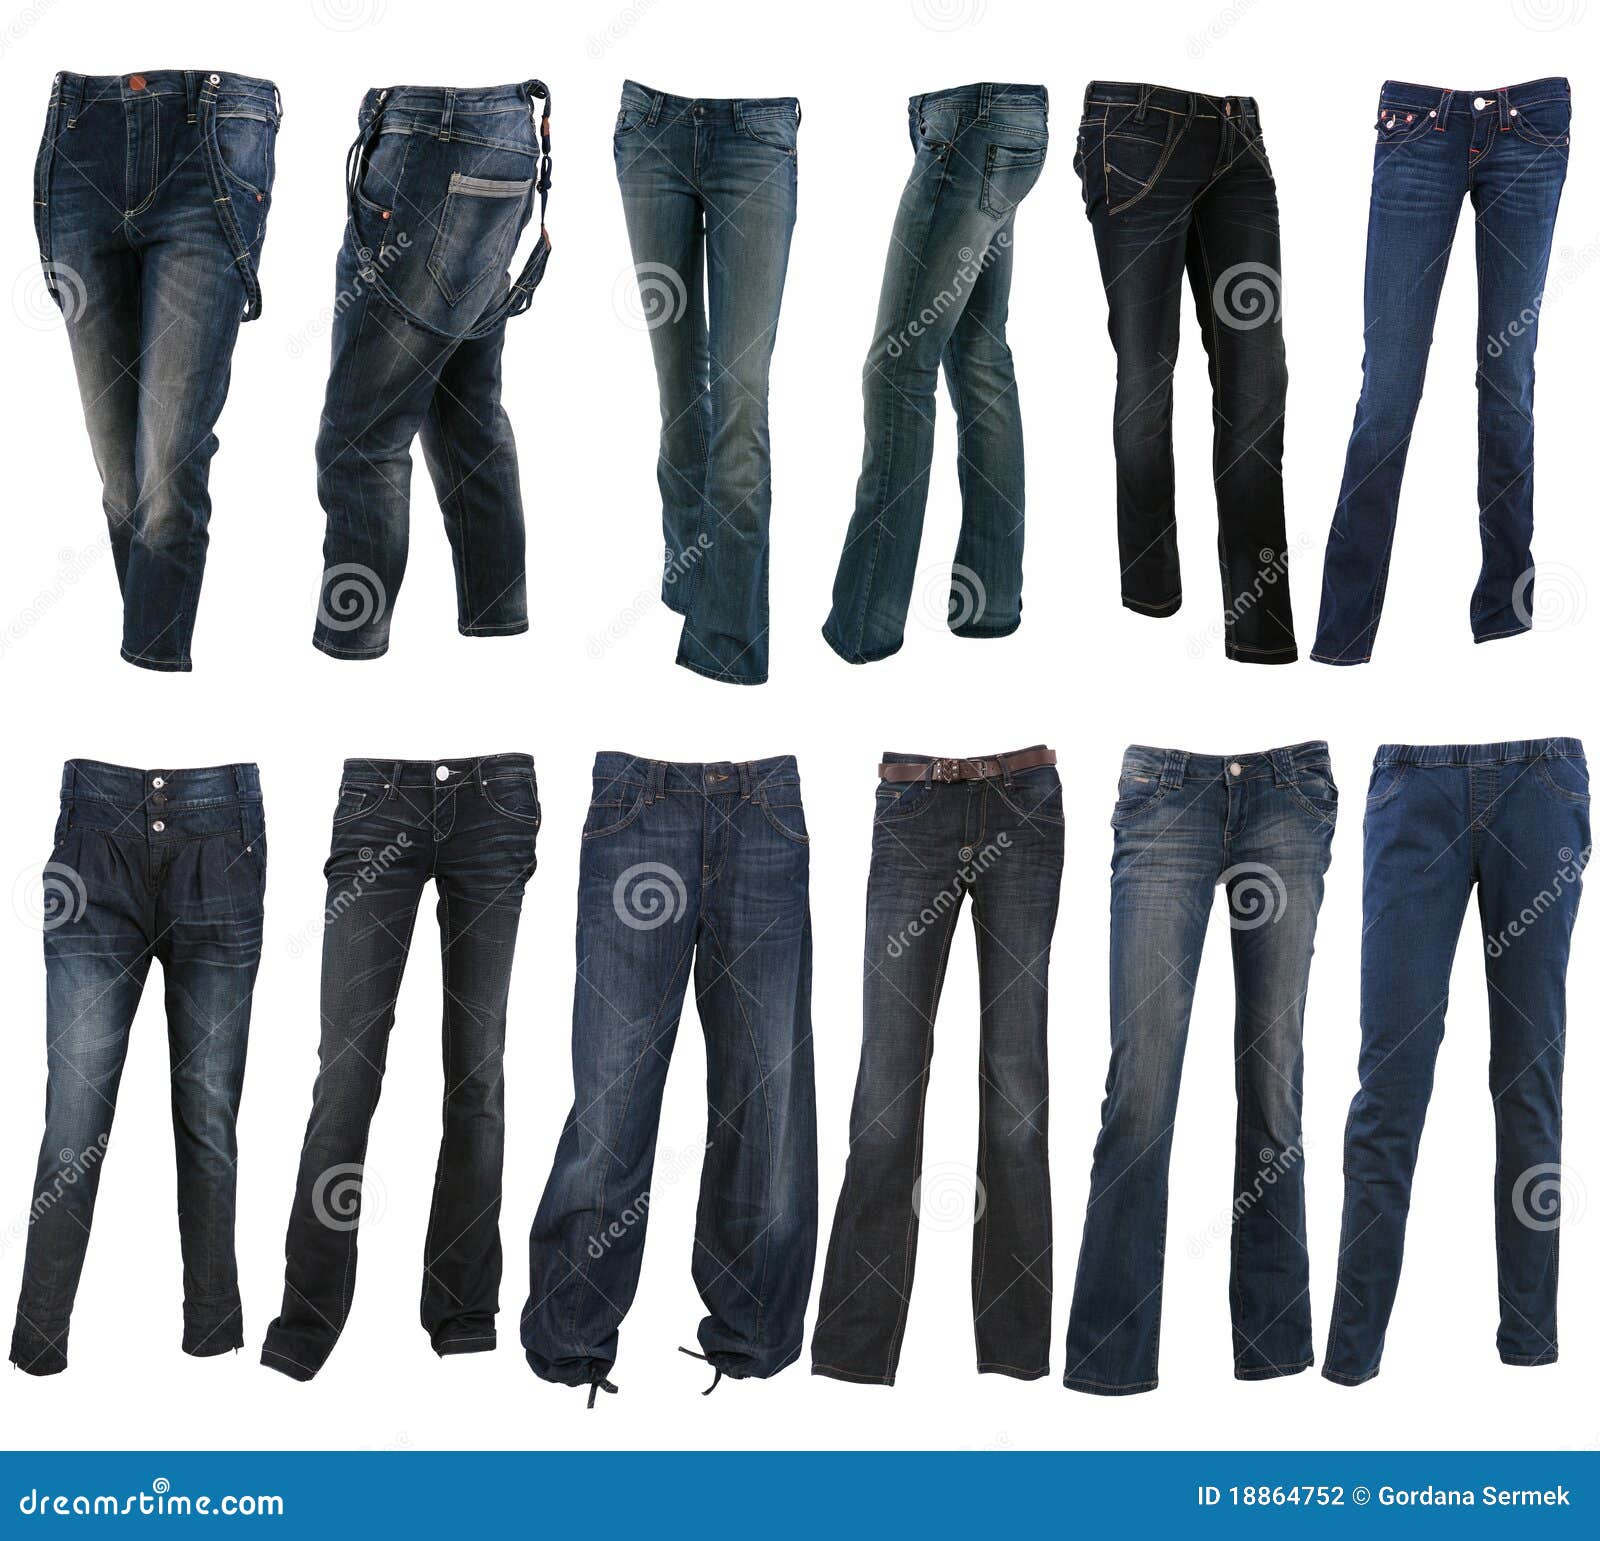 Types of Pants - A to Z of PANTS